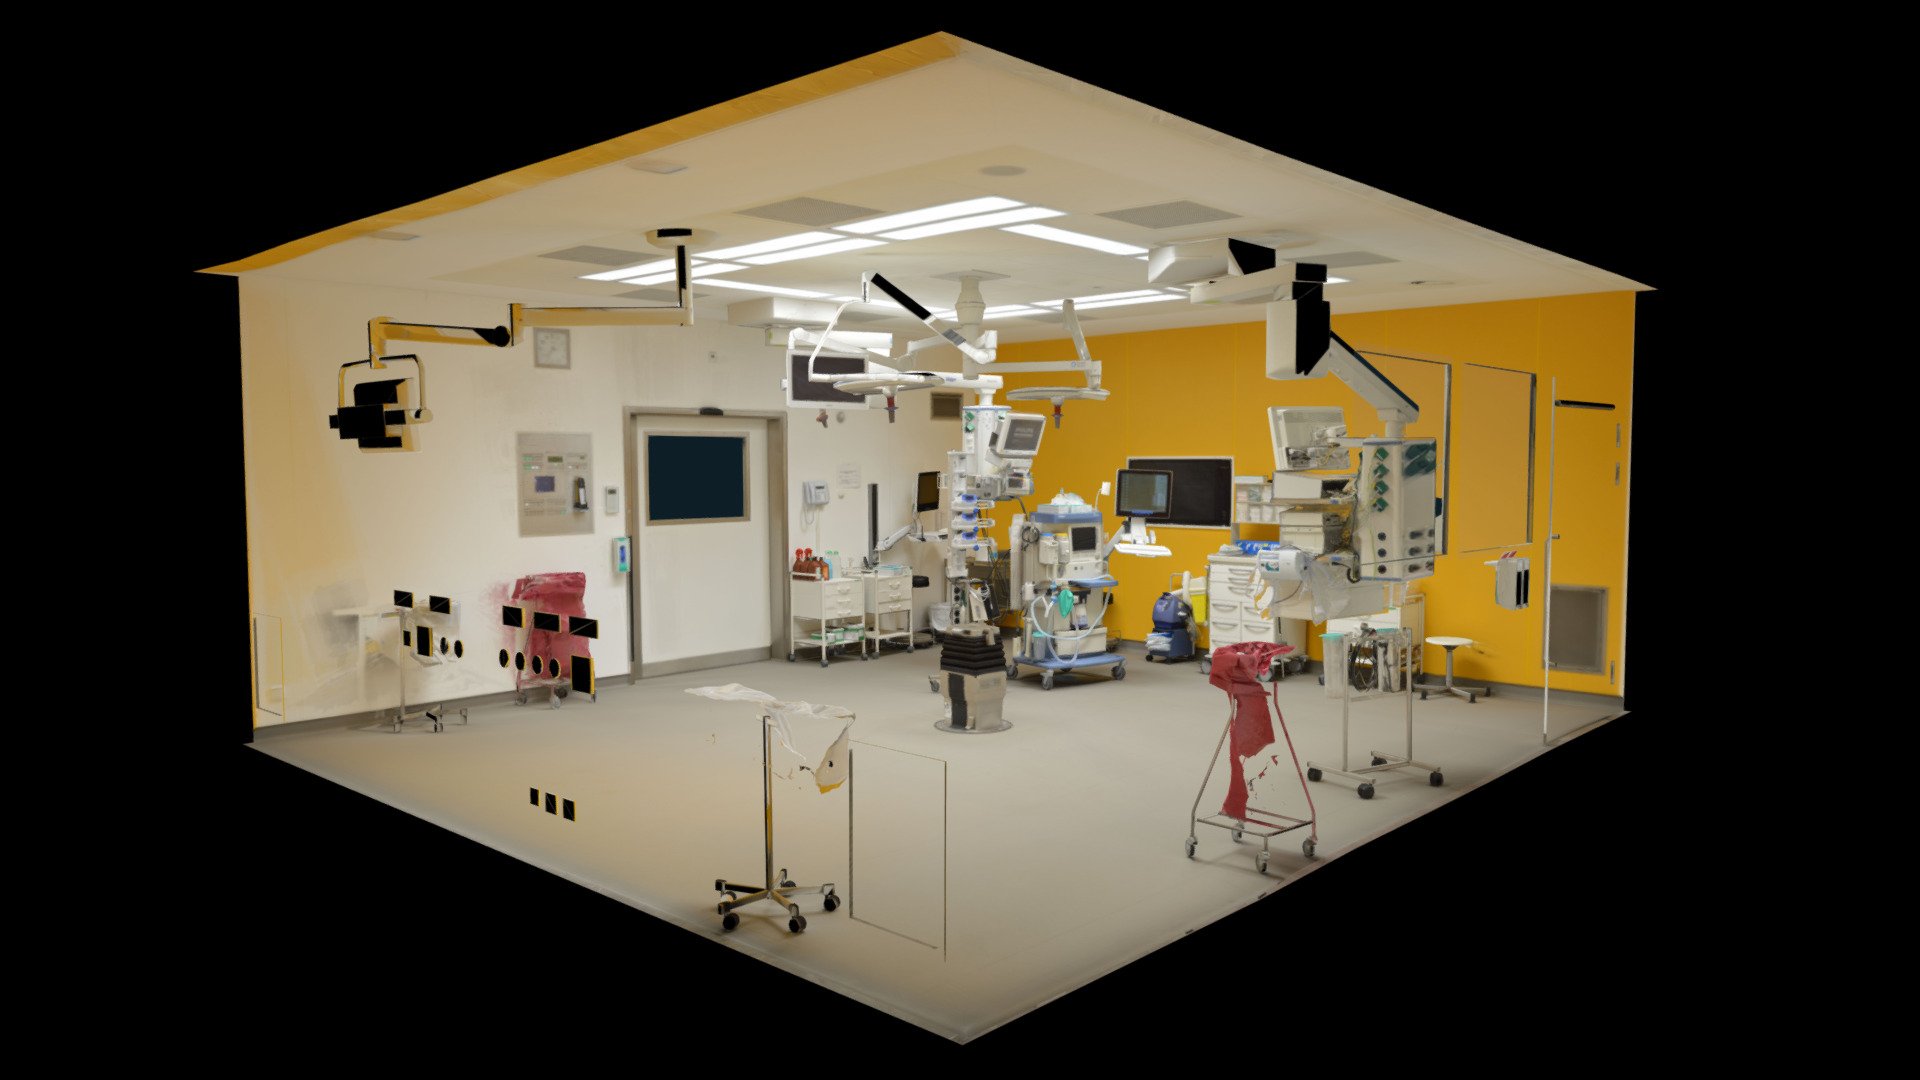 This is a photogrammetric reconstruction of an operating room of the Charité University Hospital in Berlin.

Please also check out this model on our Digital Surgery Sketchfab Account

If you use this model in your project, please cite our publication: https://pubmed.ncbi.nlm.nih.gov/35137646/

Use this textblock for the citation:

Queisner M, Pogorzhelskiy M, Remde C, Pratschke J, Sauer IM. VolumetricOR: A New Approach to Simulate Surgical Interventions in Virtual Reality for Training and Education. Surg Innov. 2022 Jun;29(3):406-415. doi: 10.1177/15533506211054240. Epub 2022 Feb 9. PMID: 35137646; PMCID: PMC9438748.

More about our research: http://experimental-surgery.de/digitalsurgery/

The paper explores the concept of letting surgical stuff train in a virtual operating setting.
This is one of several general ORs in the Charité Campus Mitte (CCM), scanned in 2018. Shot with Nikon D3400 (500 images), reconstructed in Metashape, refined in Blender 3d model